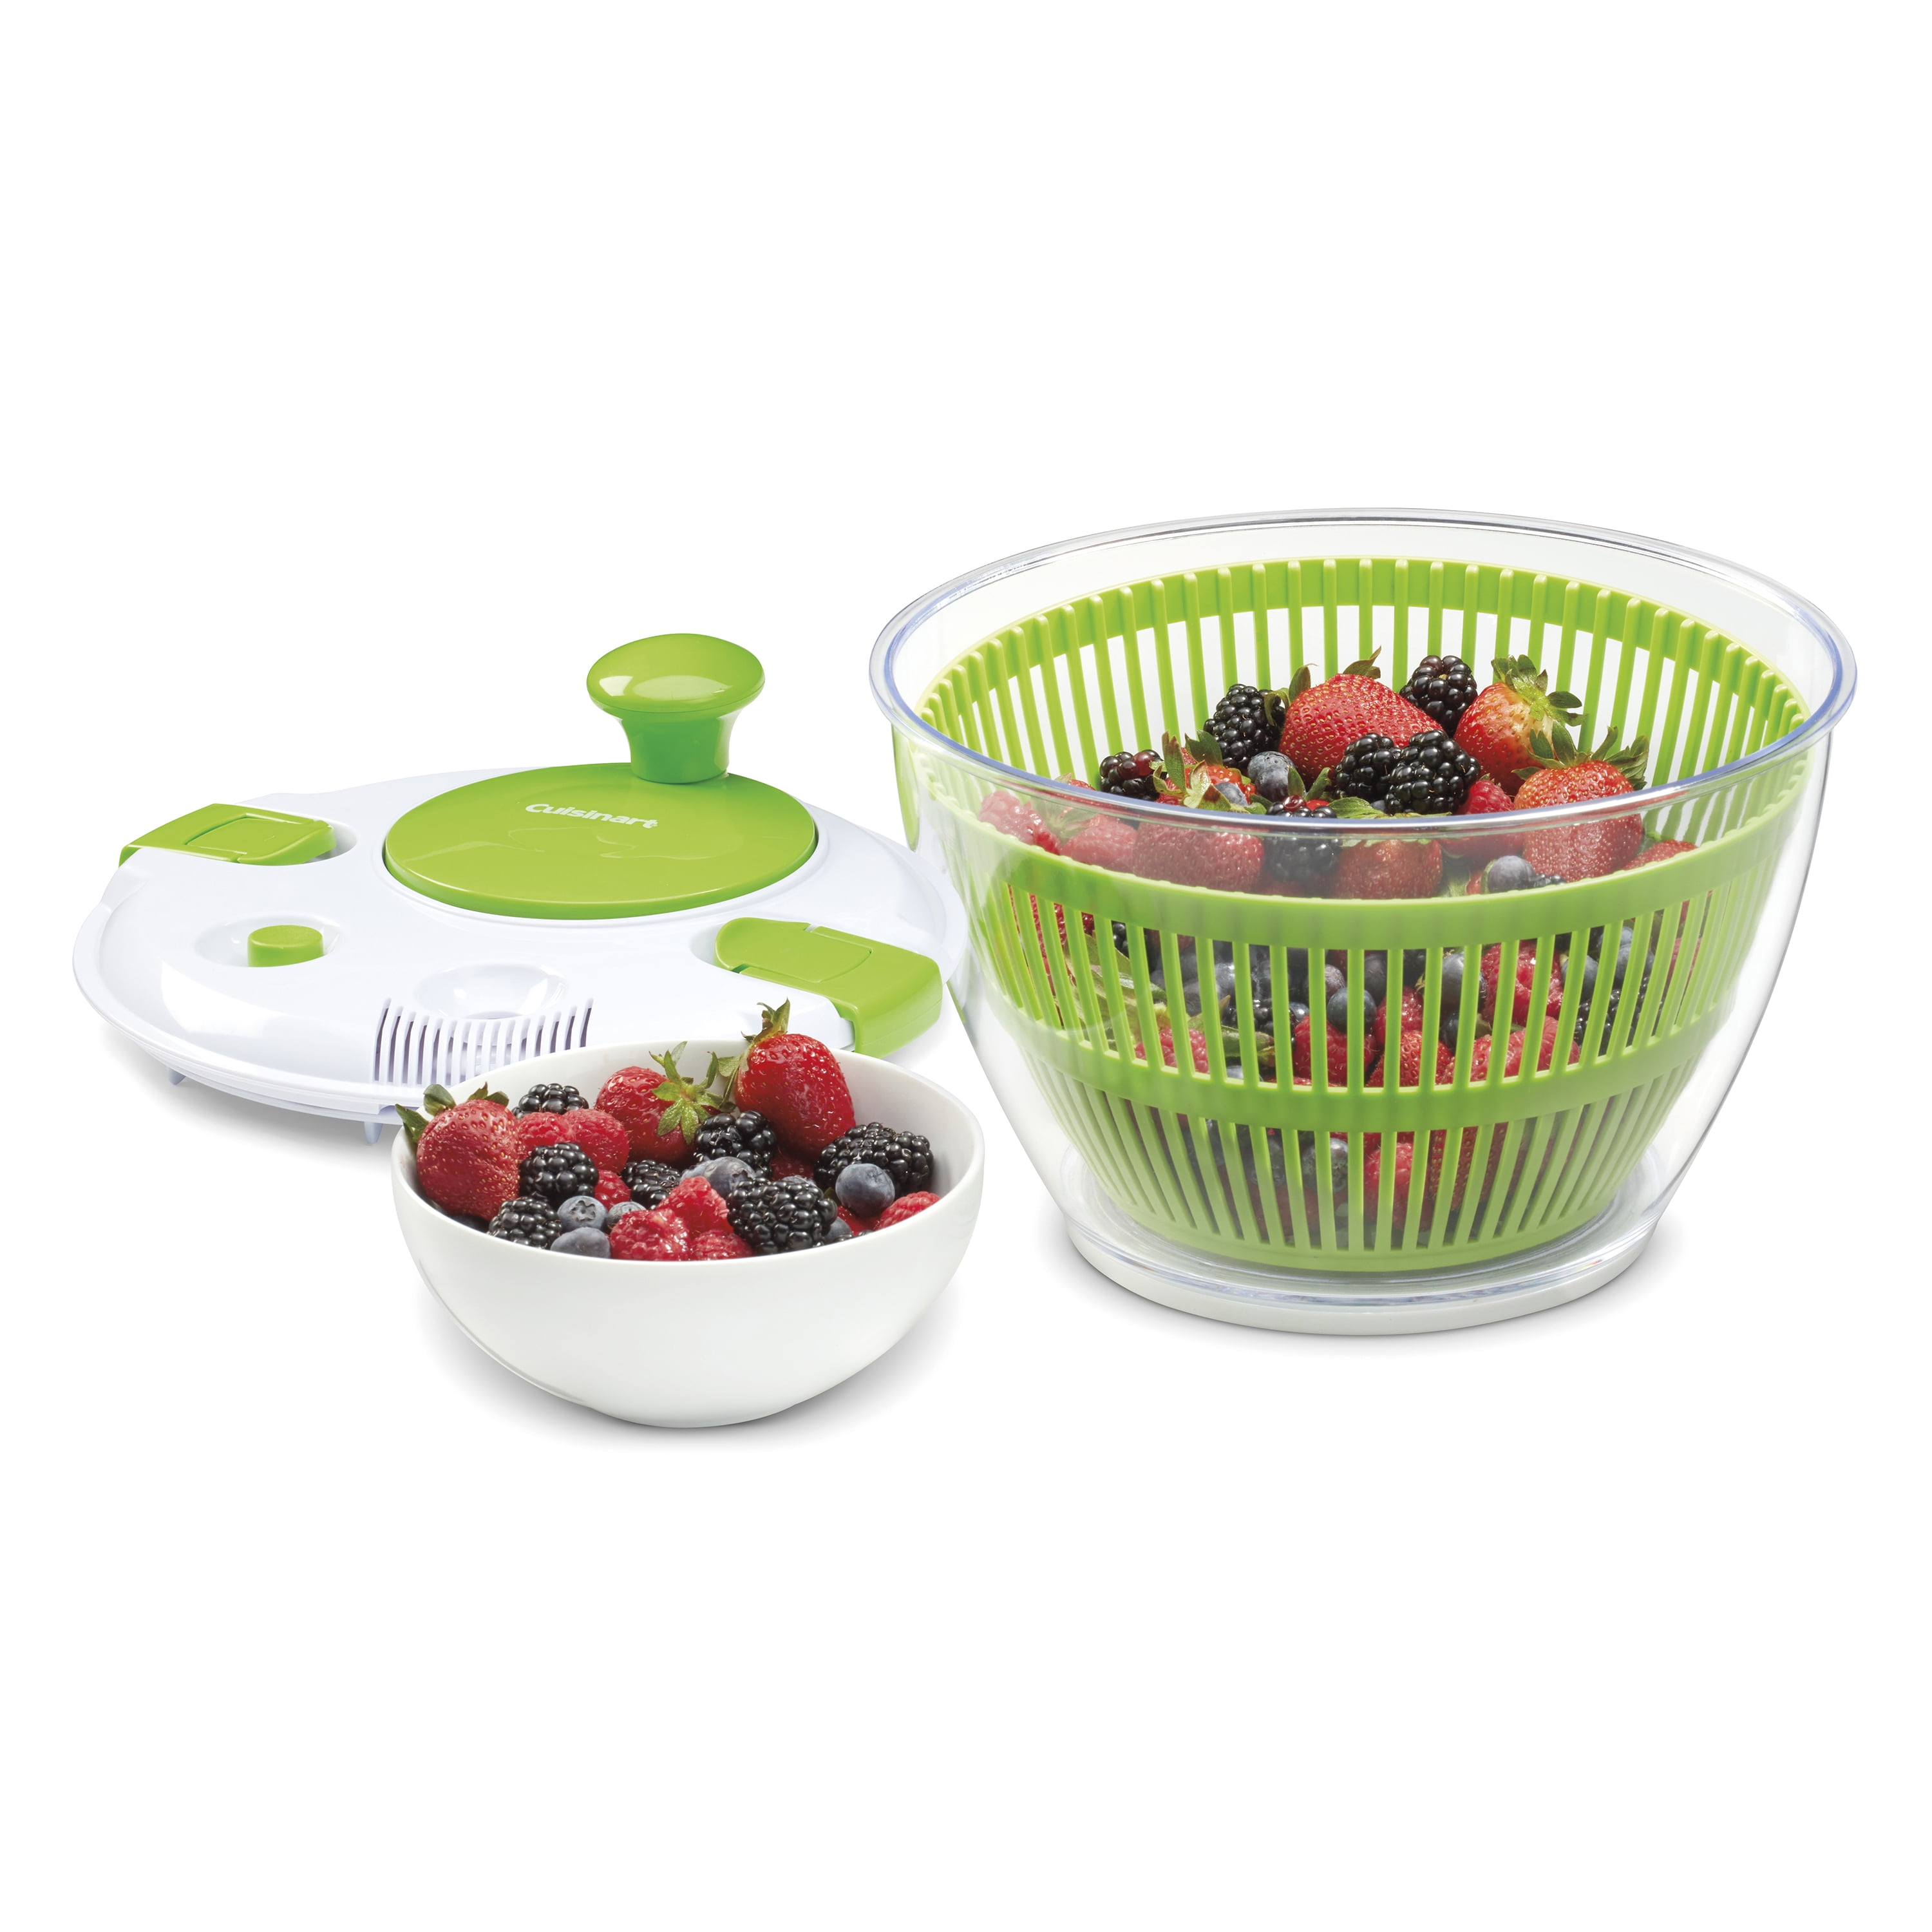 Cuisinart NEW in box Salad Spinner - Lil Dusty Online Auctions - All Estate  Services, LLC